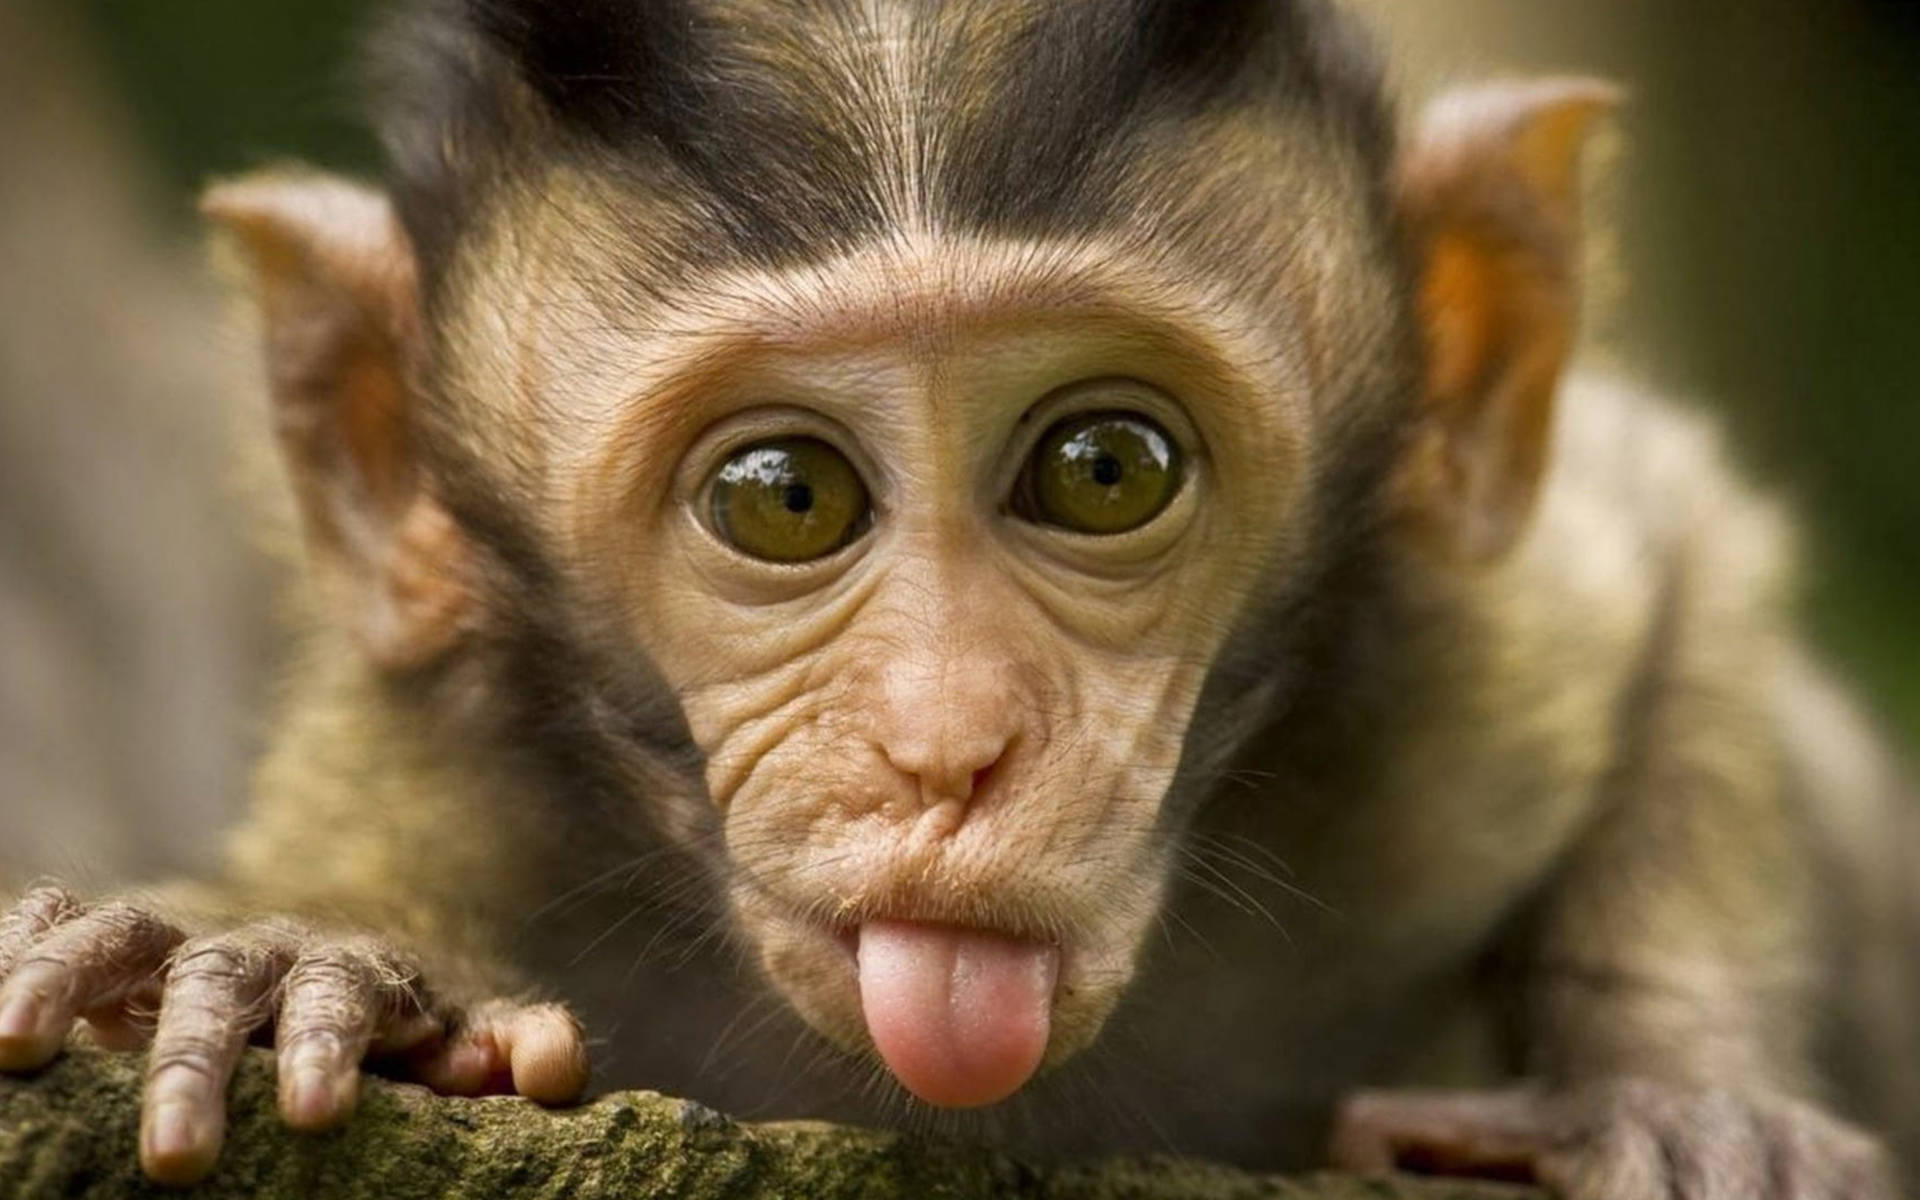 Funny Chimpanzee Face Expression Wallpaper